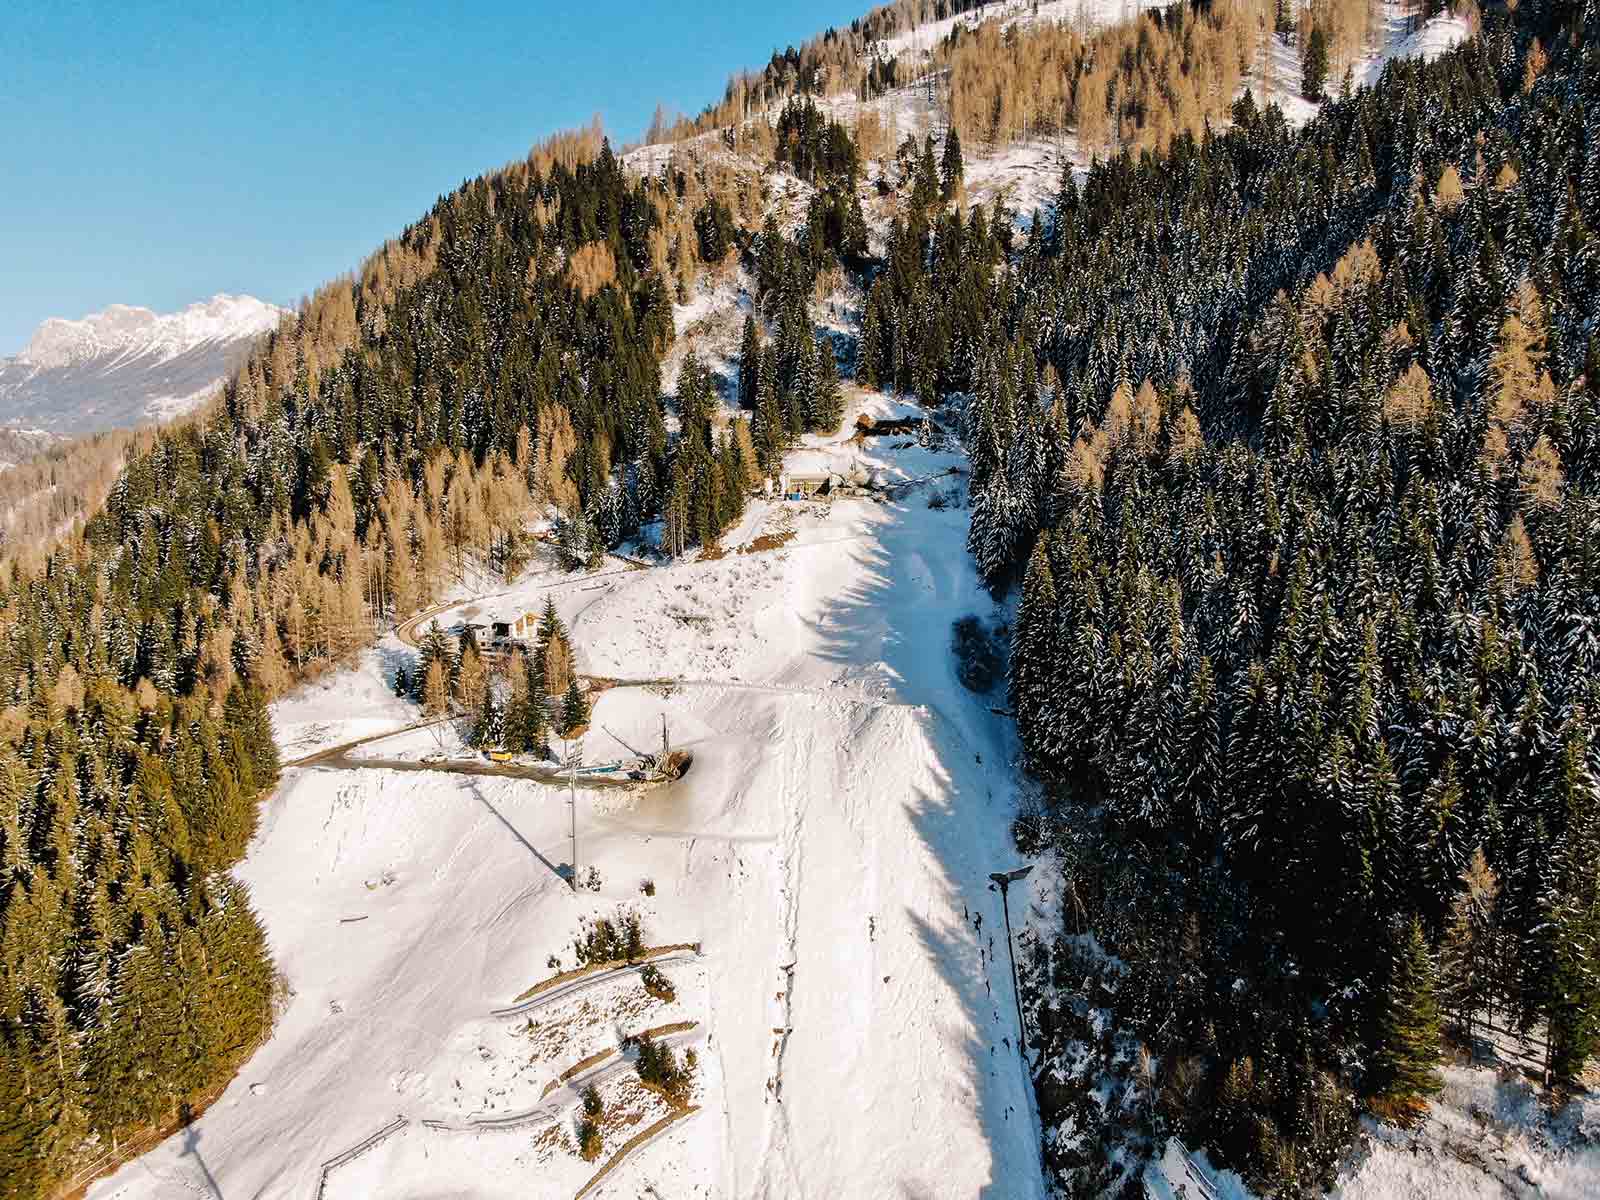 A ski slope surrounded by trees and snow on the mountains of Predazzo.